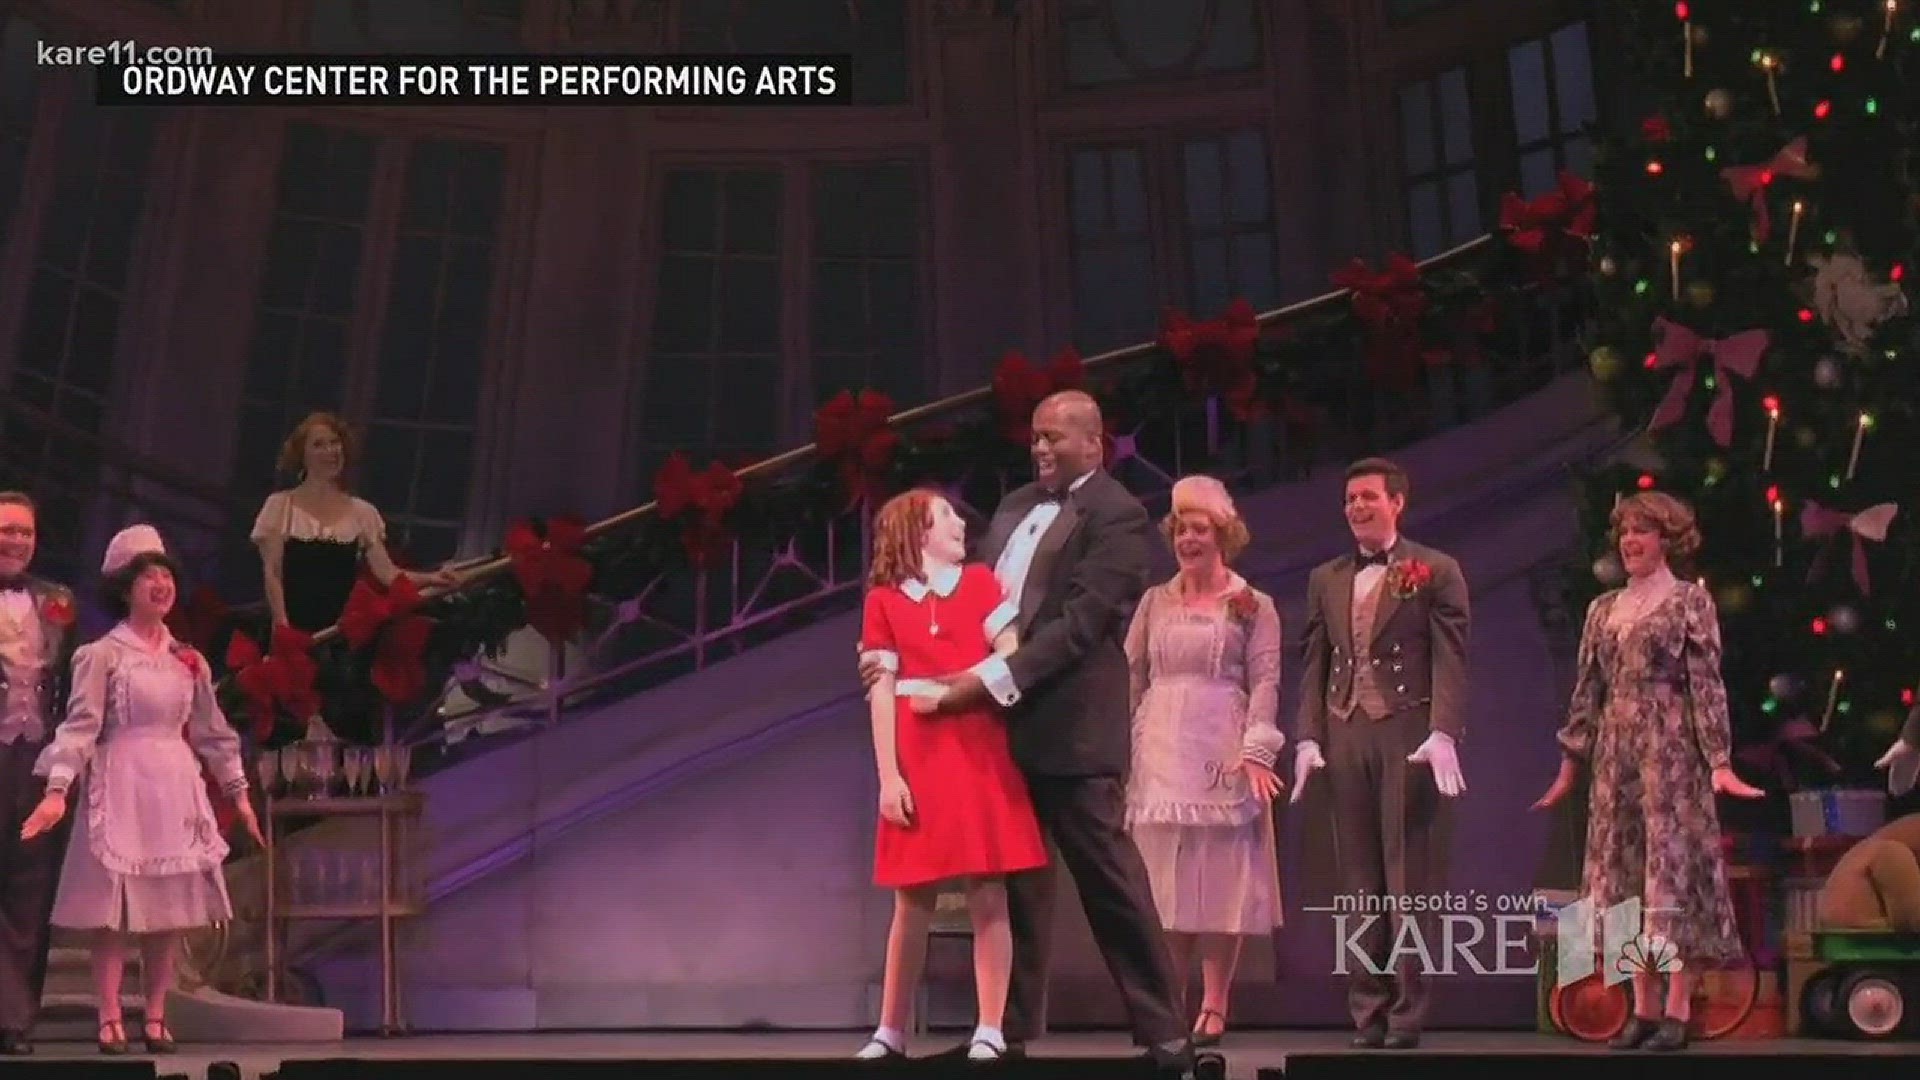 Lance Roberts, who plays Oliver Warbucks and Ann Michels, who plays Warbucks' assistant stopped by the KARE 11 News at 4 to talk about the show. http://kare11.tv/2BdzXQH